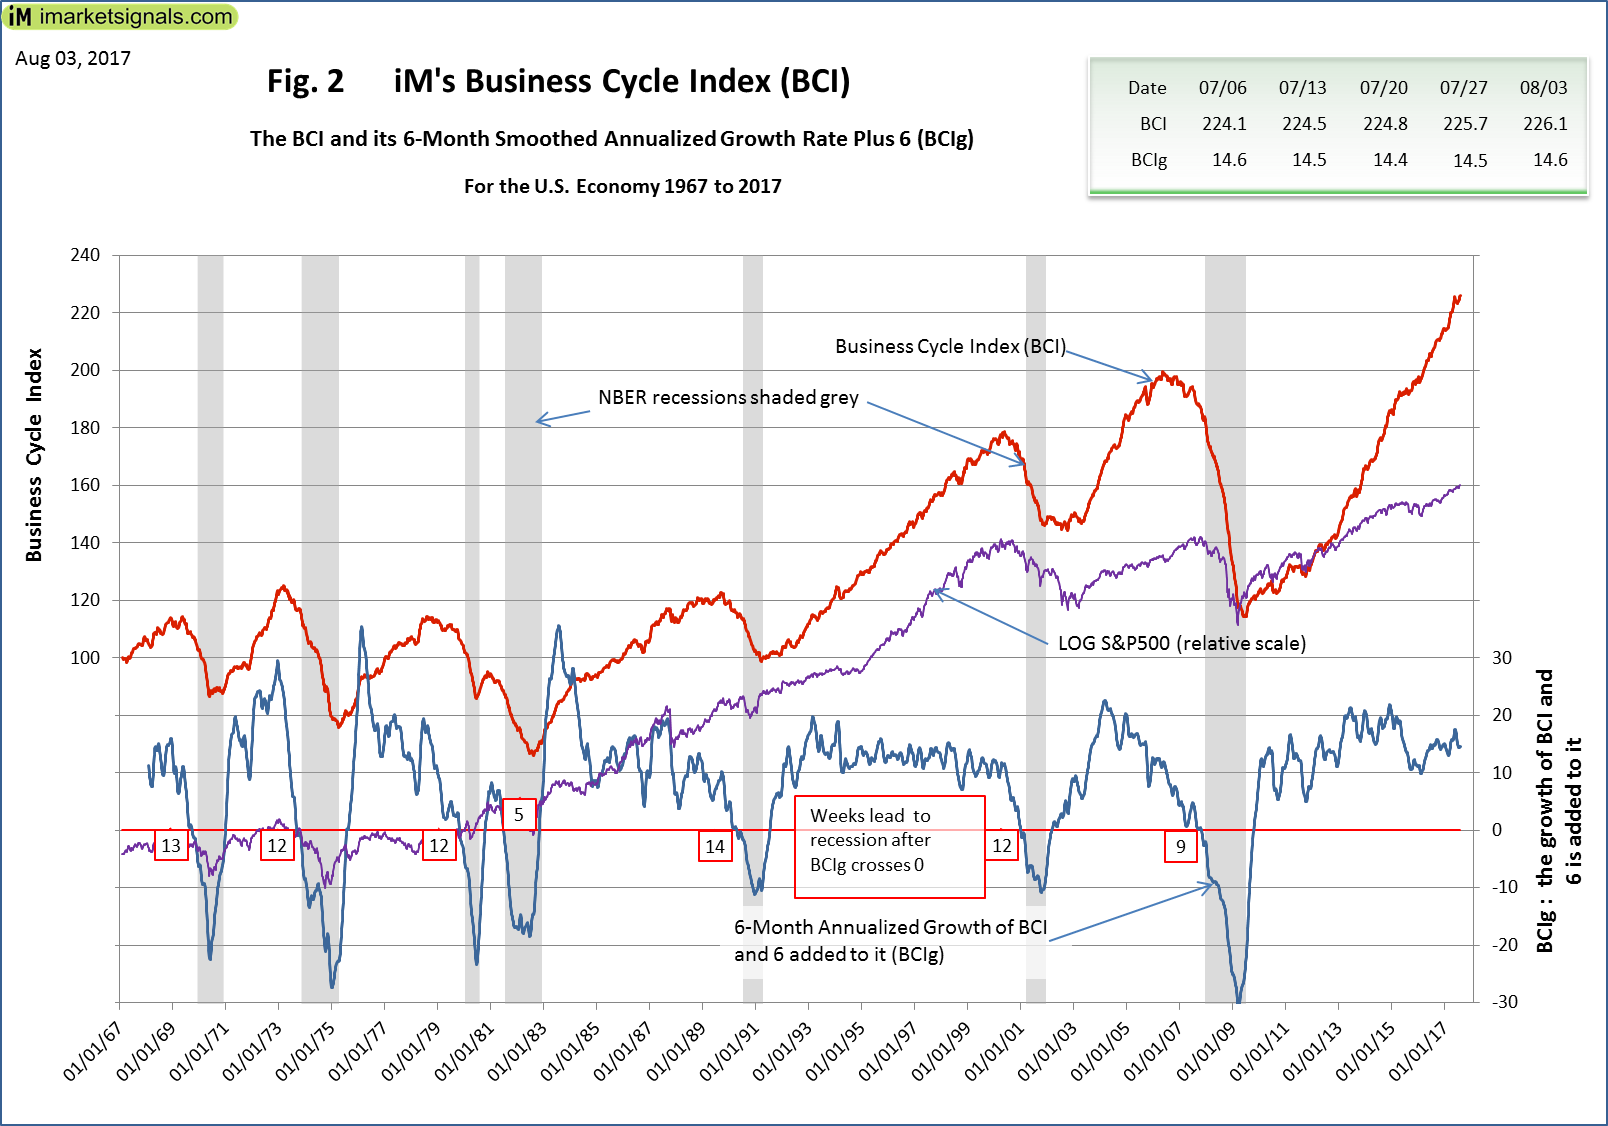 Fig 2 :iM's Business Cycle Index: BCI and 6M Annualized Growth